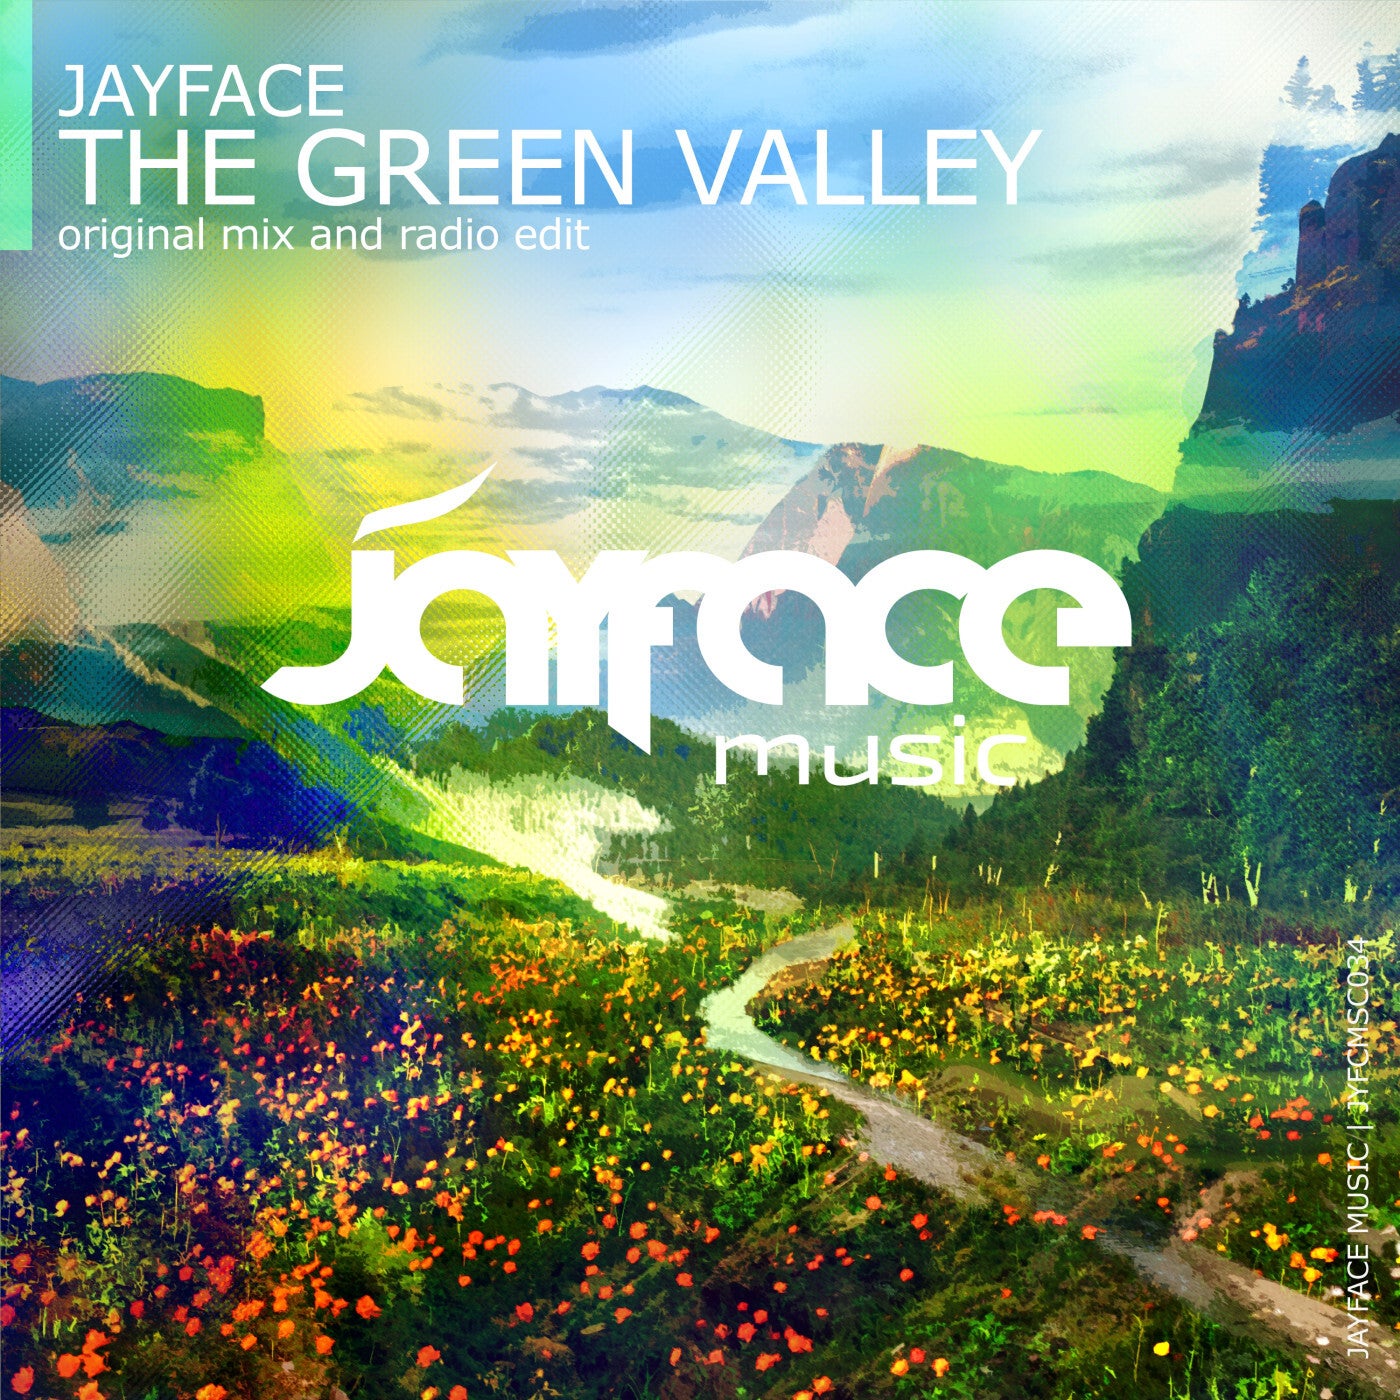 The Green Valley